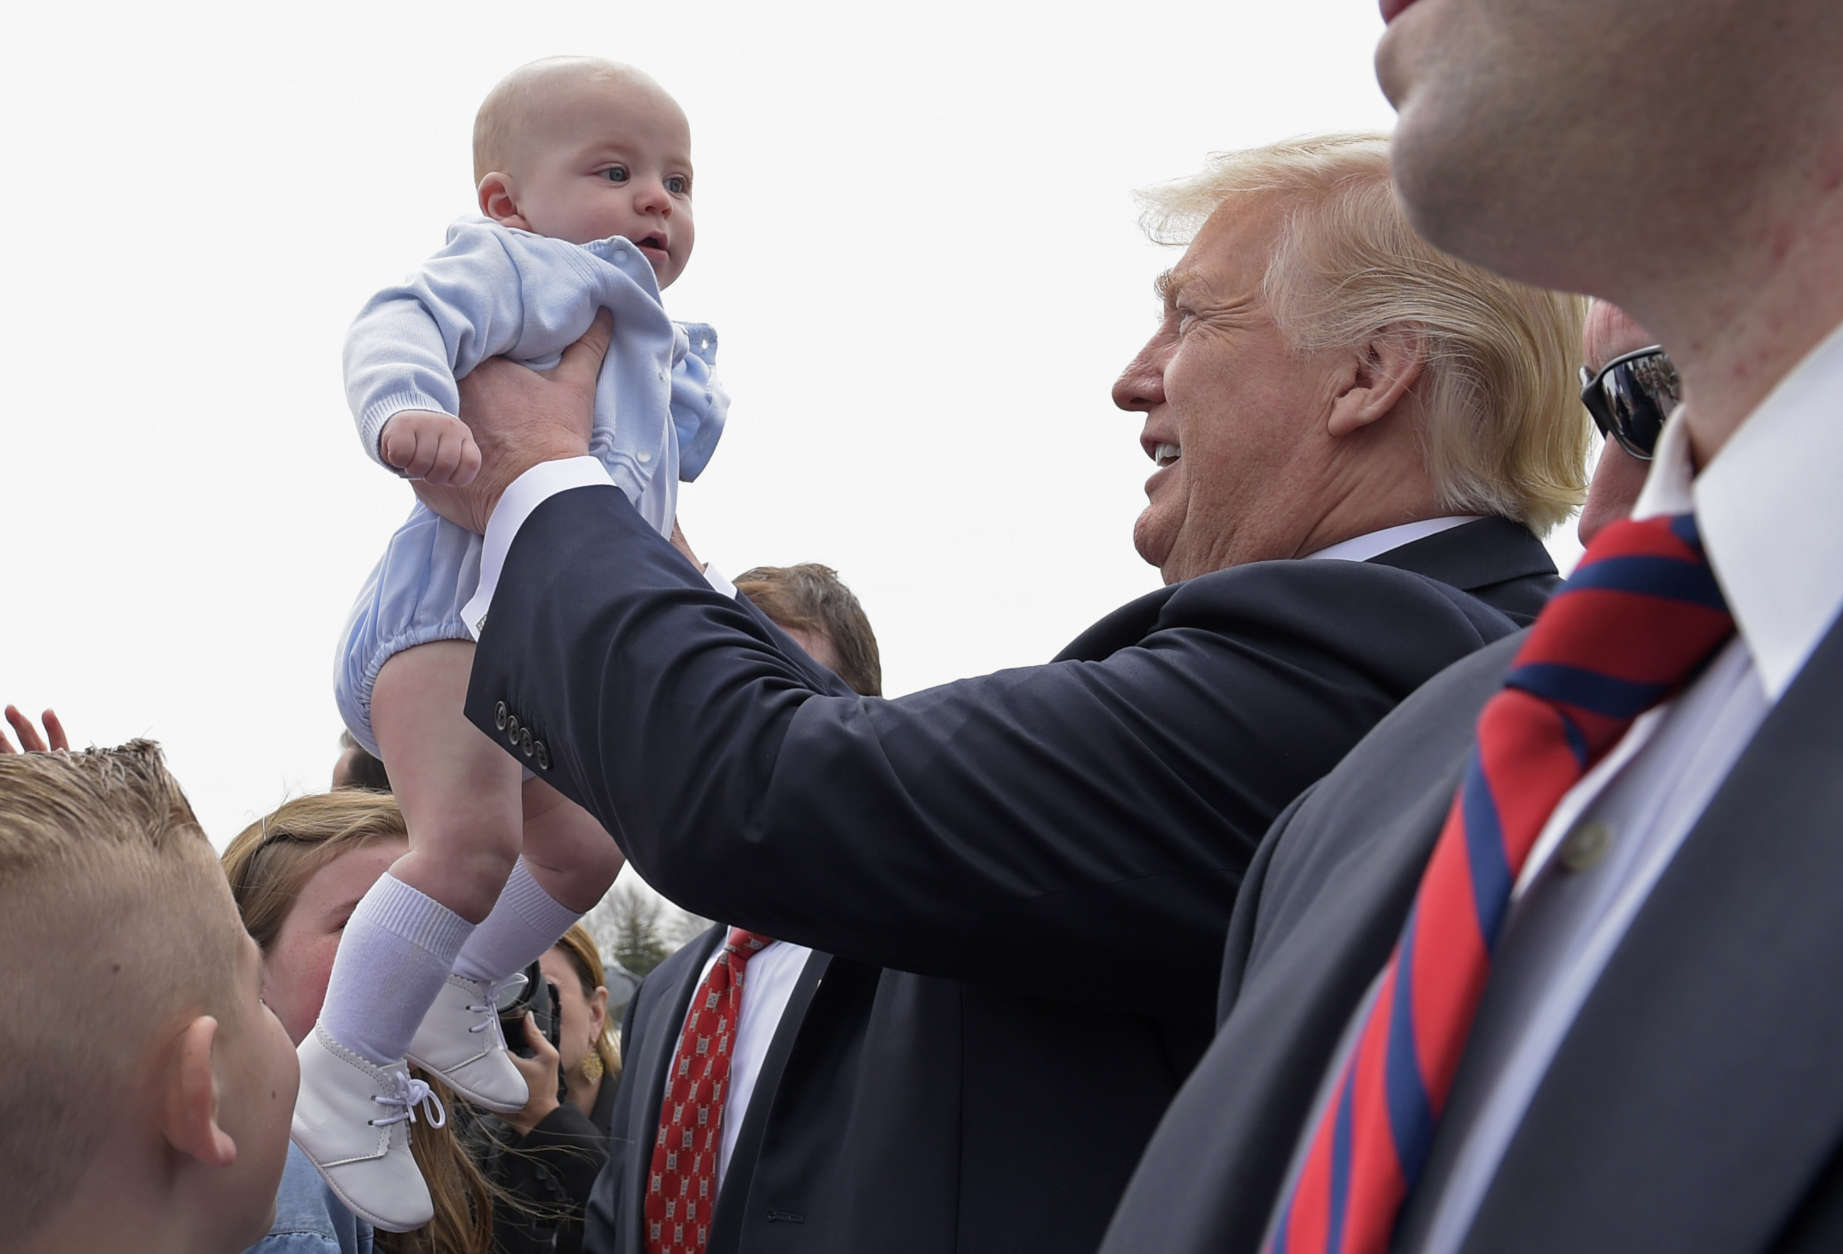 President Donald Trump greets a baby and others at a Milwaukee airport April 18. He signed an executive order that seeks to make changes to a visa program that brings in high-skilled workers. (AP photo/Susan Walsh)